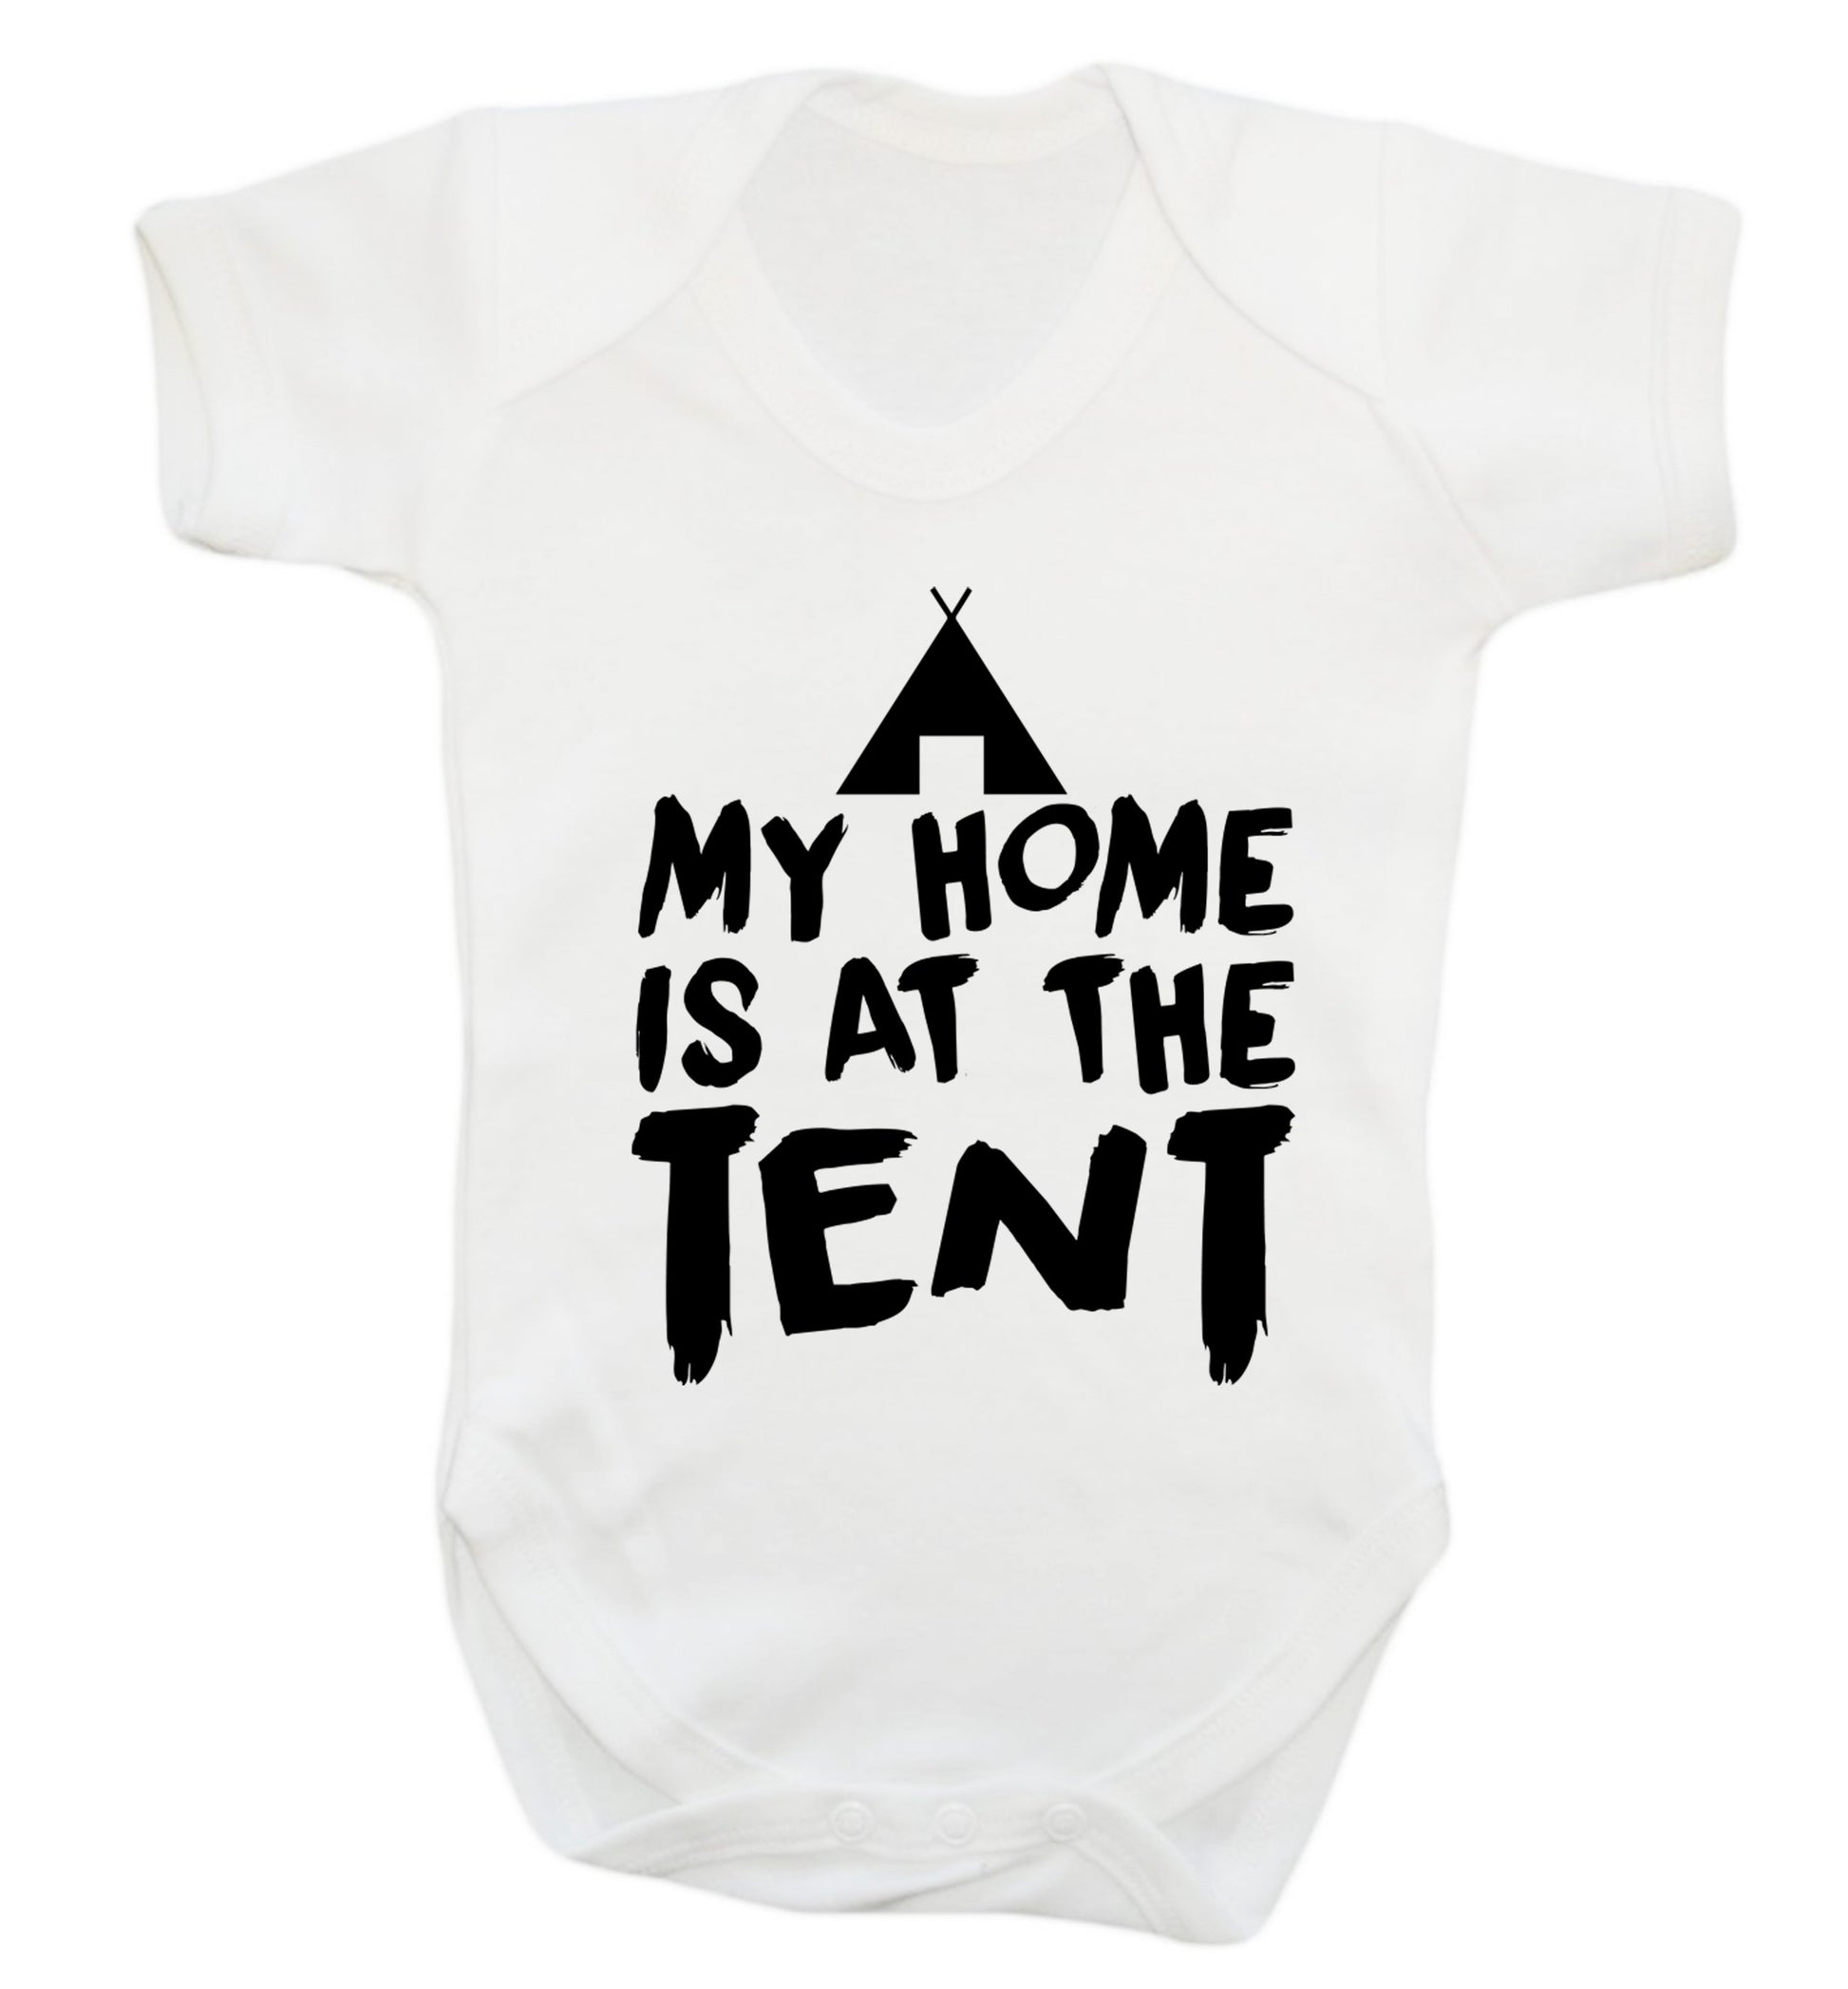 My home is at the tent Baby Vest white 18-24 months